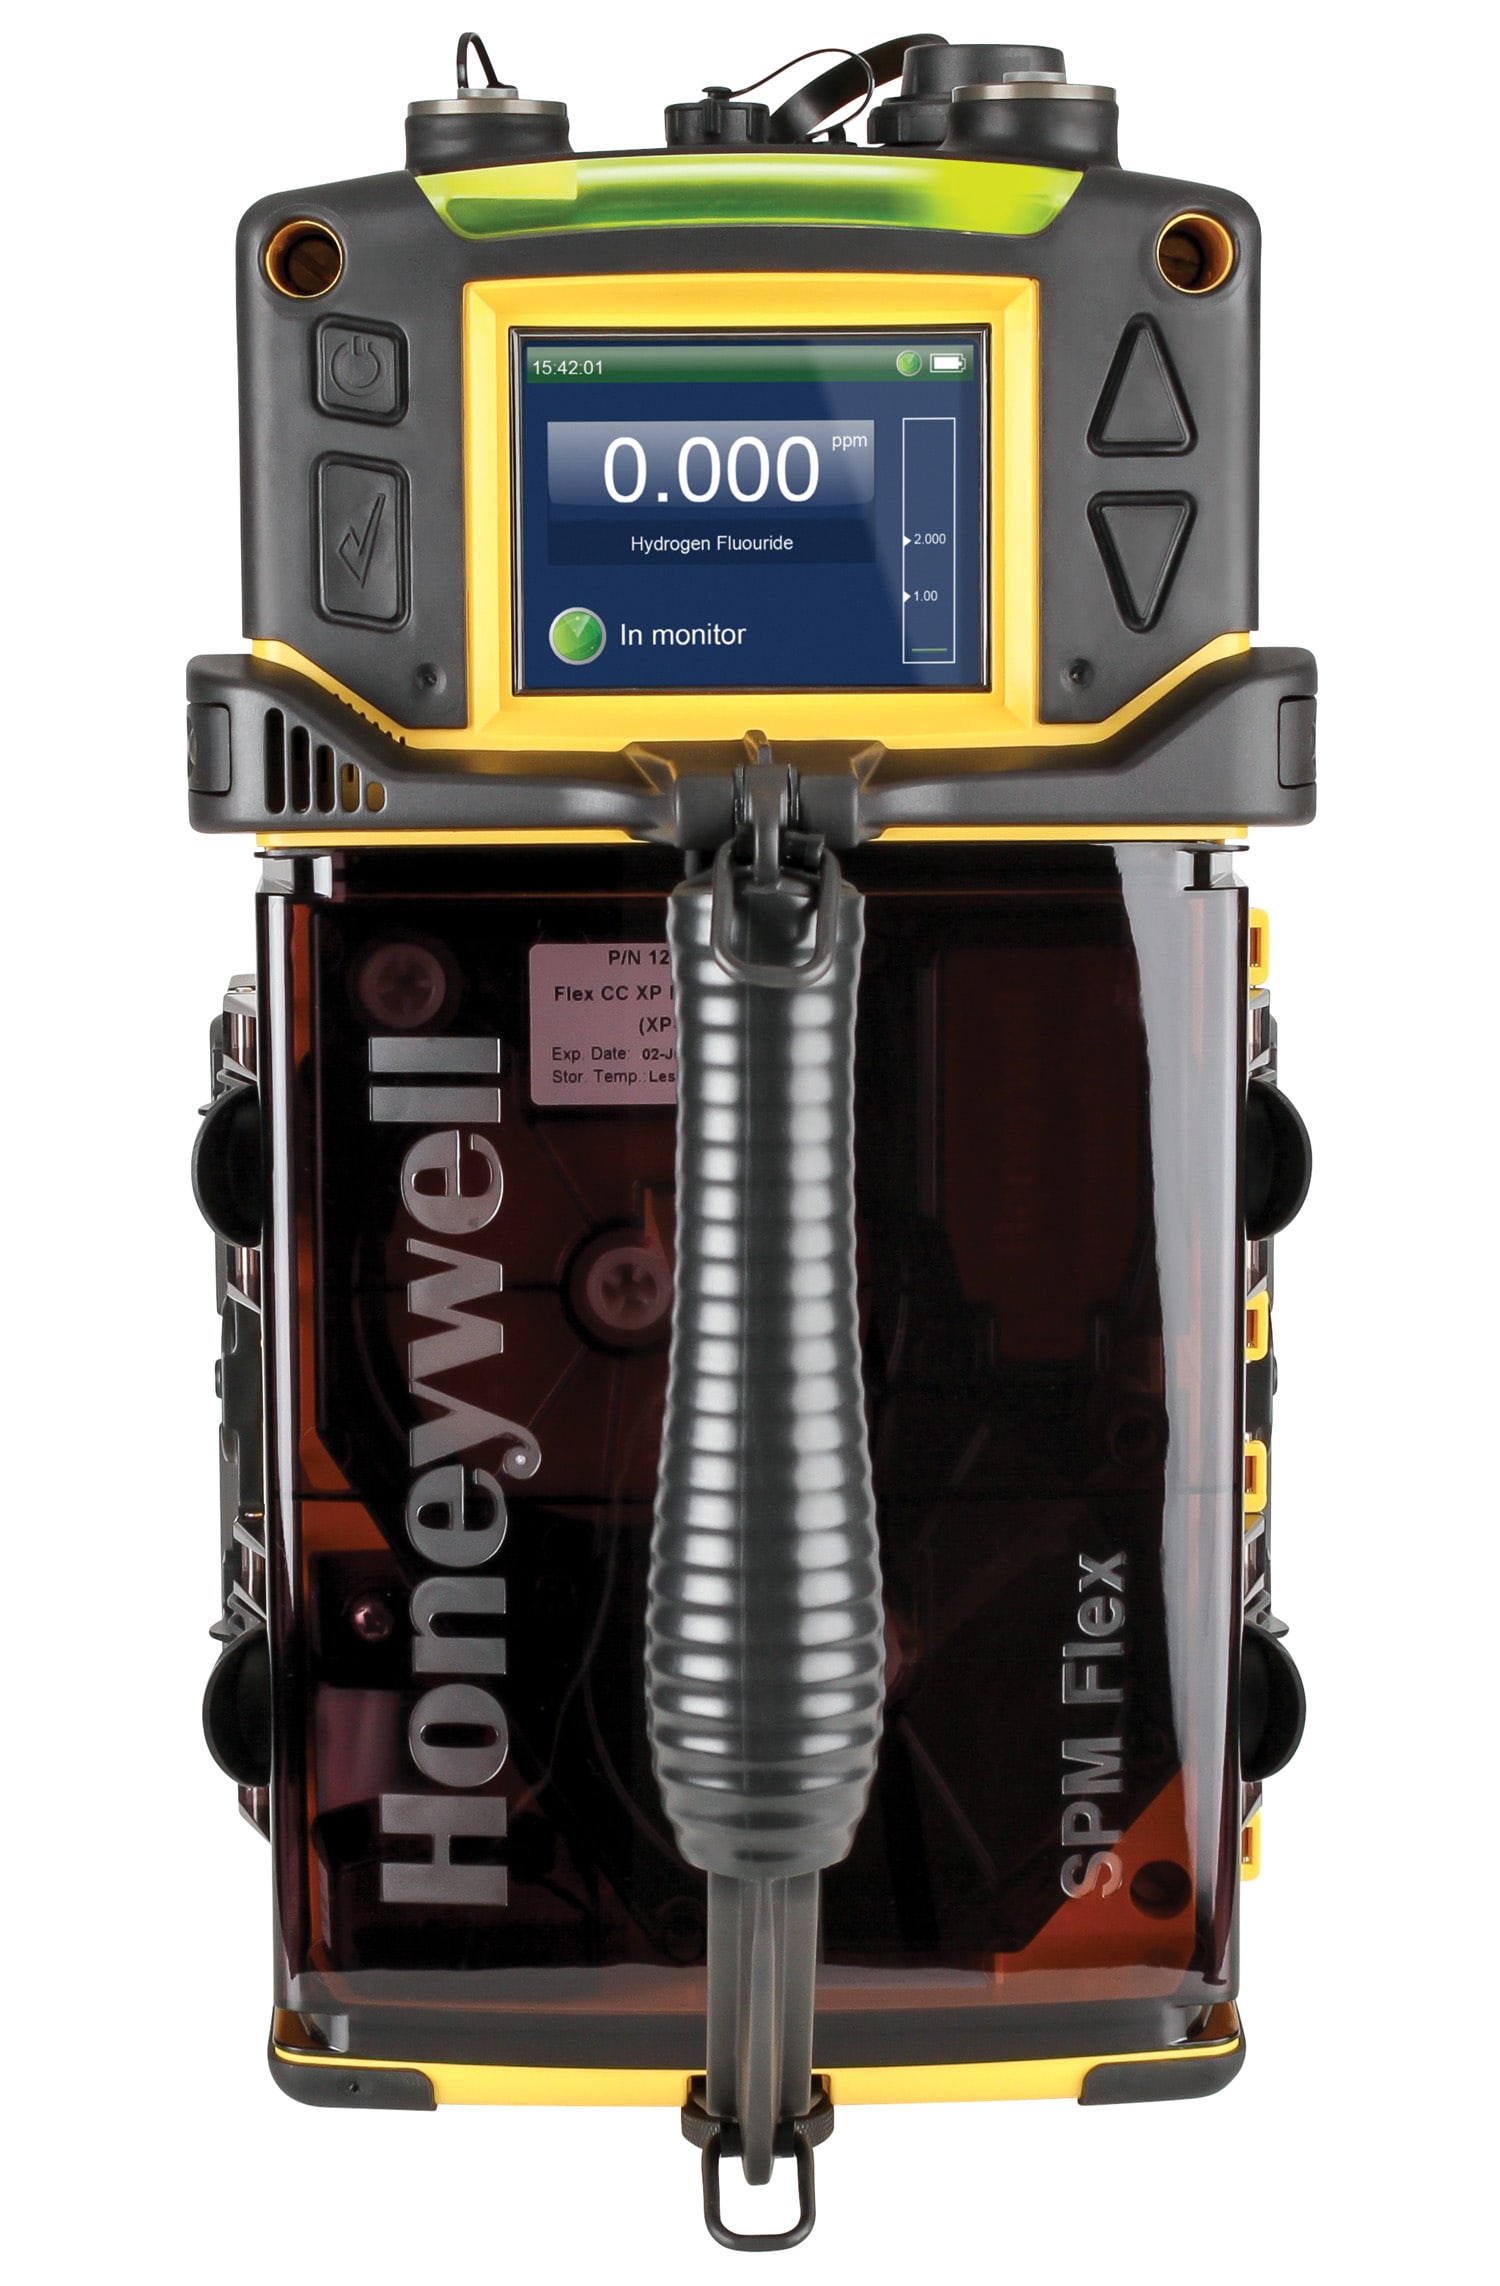 Tape-Based Gas Detector for Low-Level Toxics – SPM Flex from Honeywell